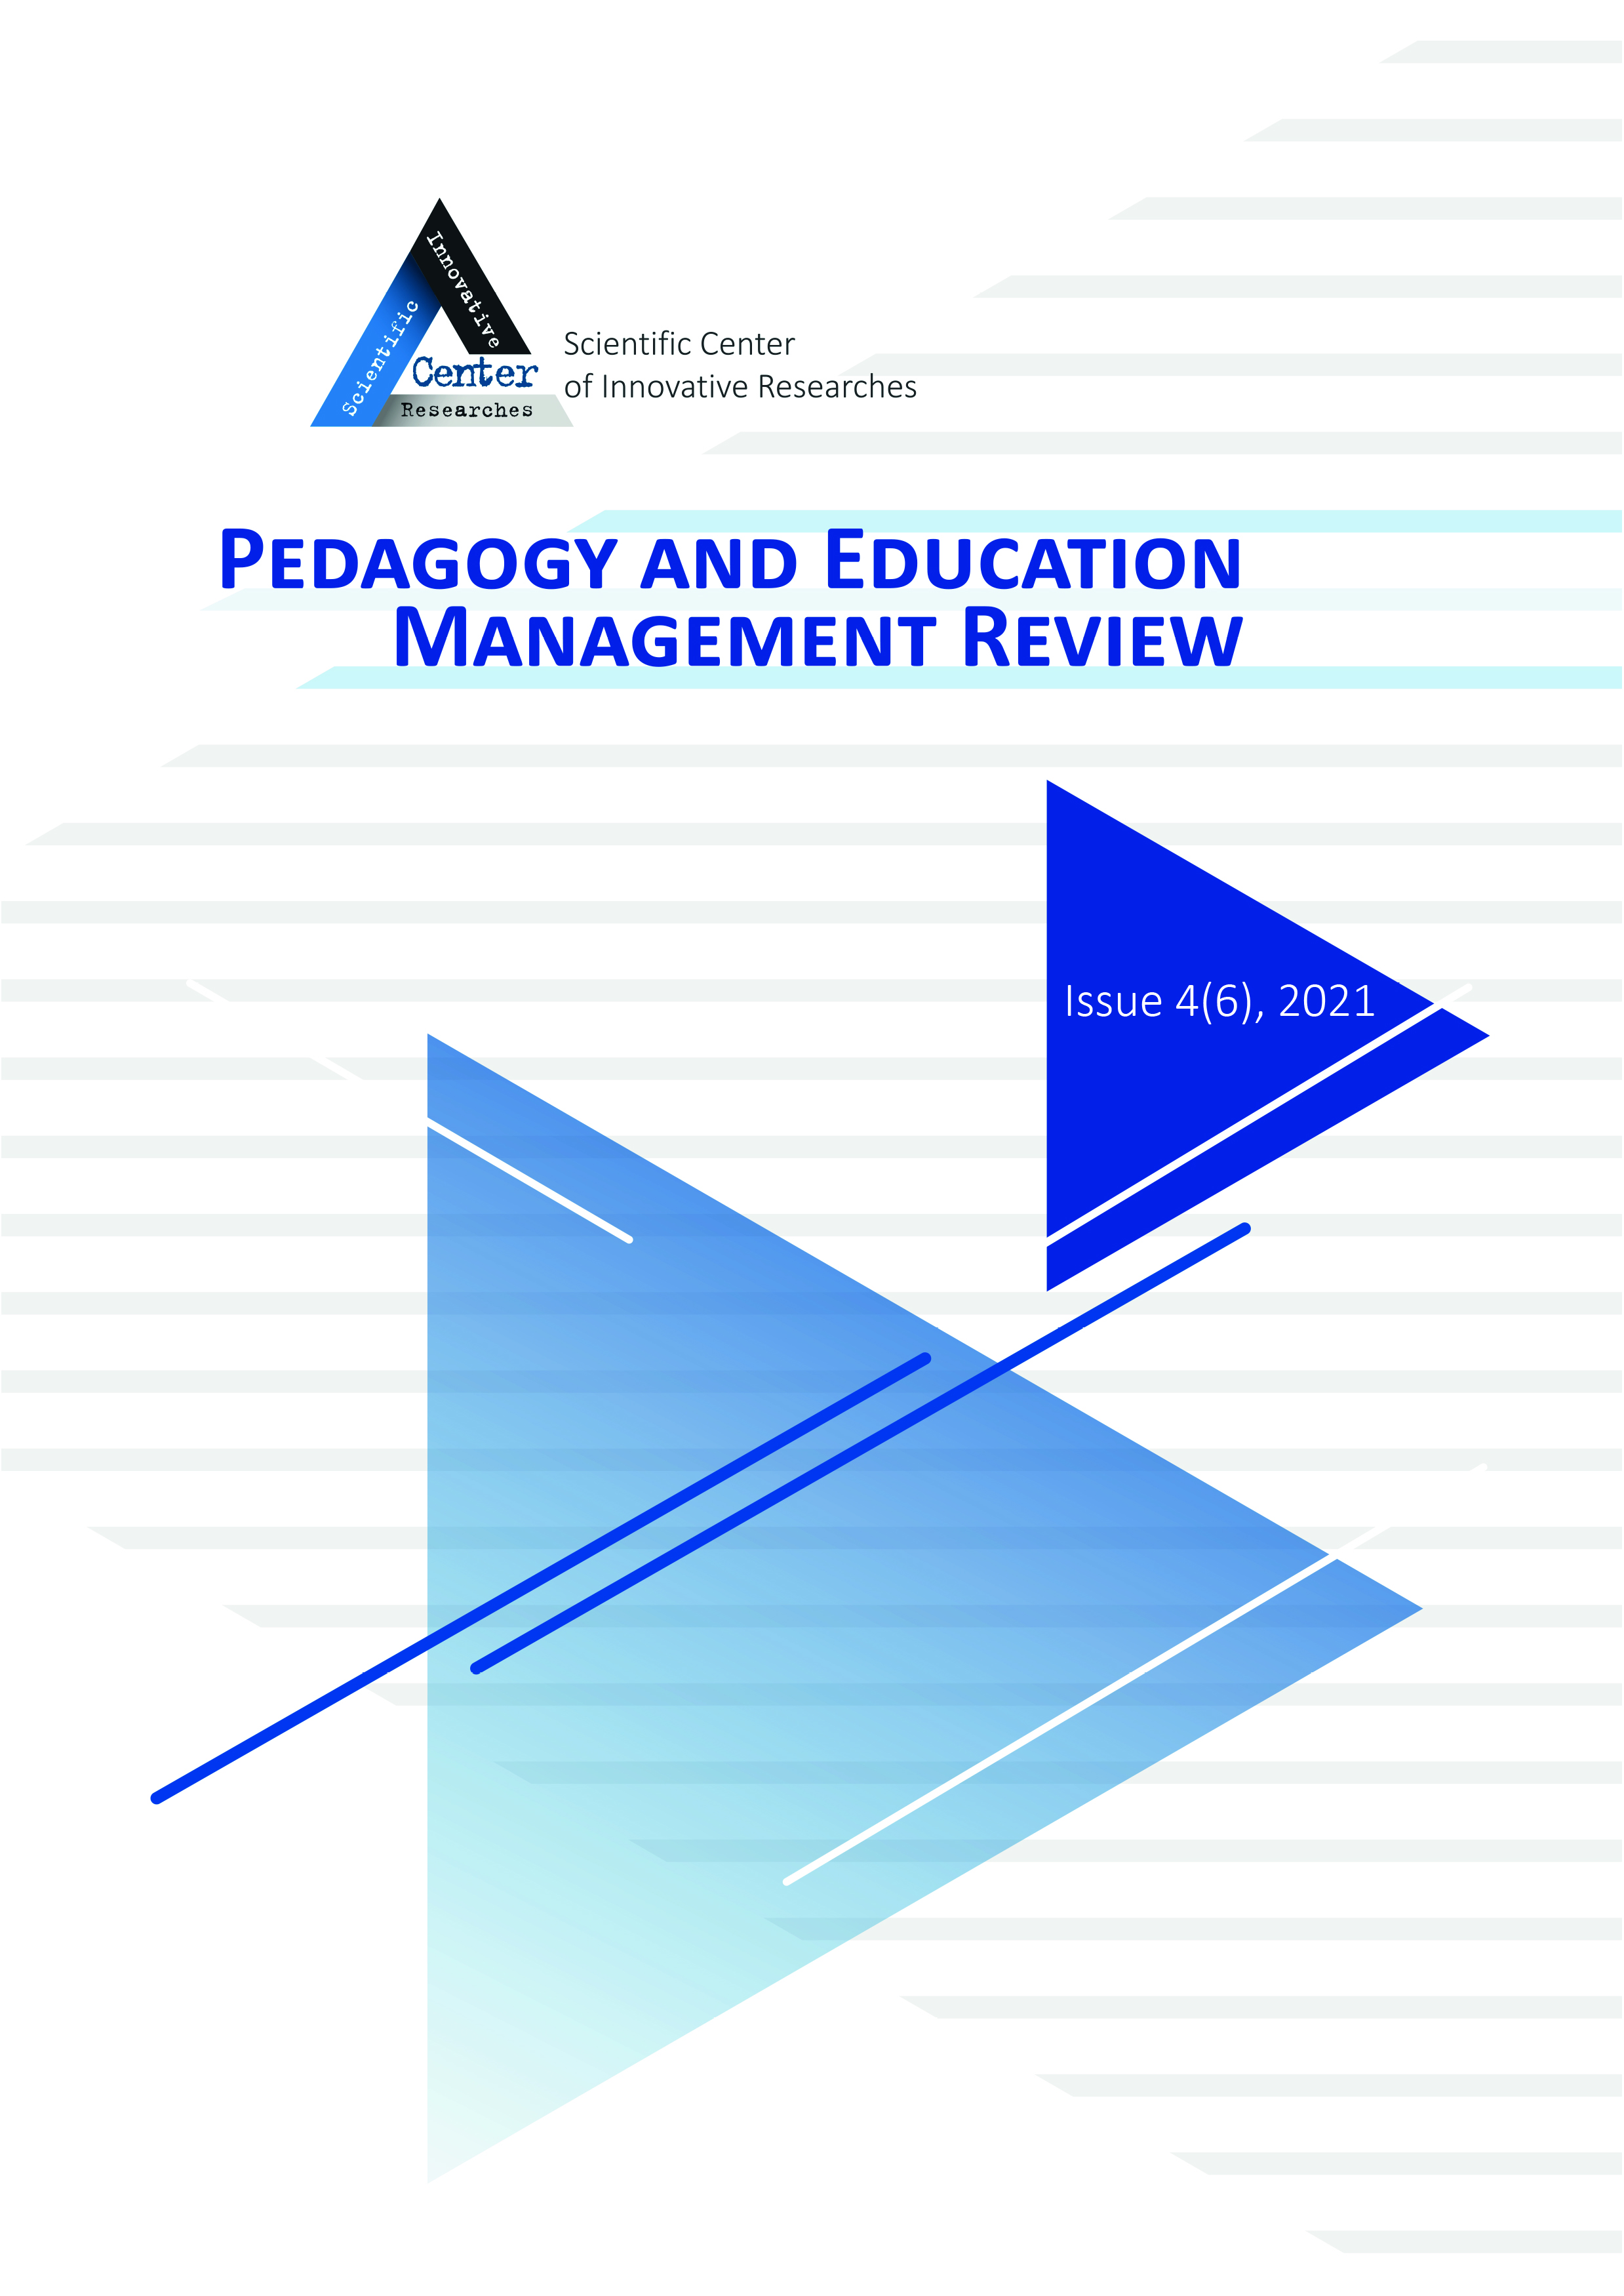 					View No. 4 (2021): PEDAGOGY AND EDUCATION MANAGEMENT REVIEW
				